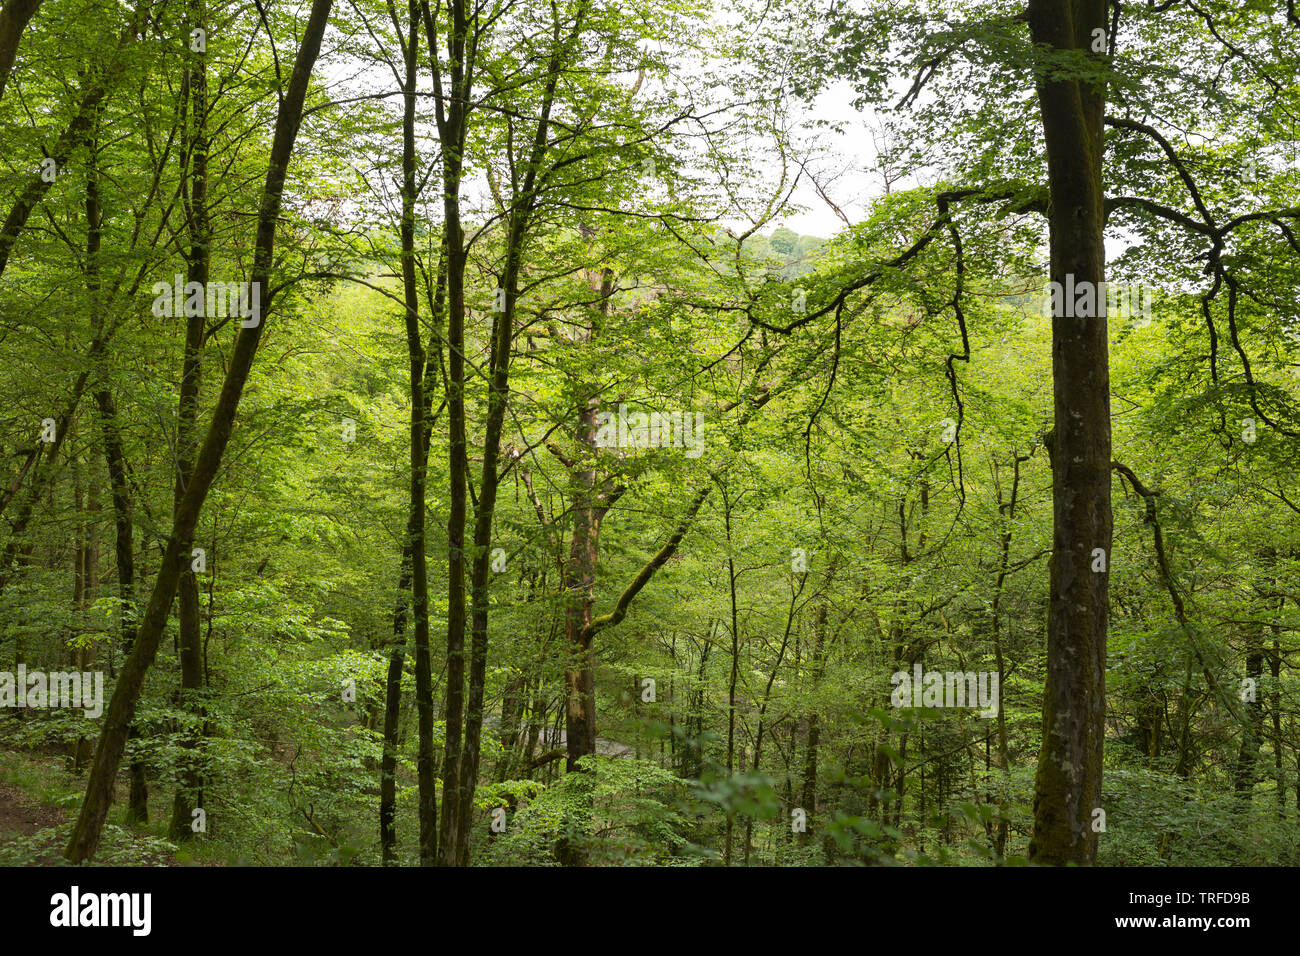 Beech trees in a forest at the end of spring in the Ardennes near Bertrix in Belgium Stock Photo